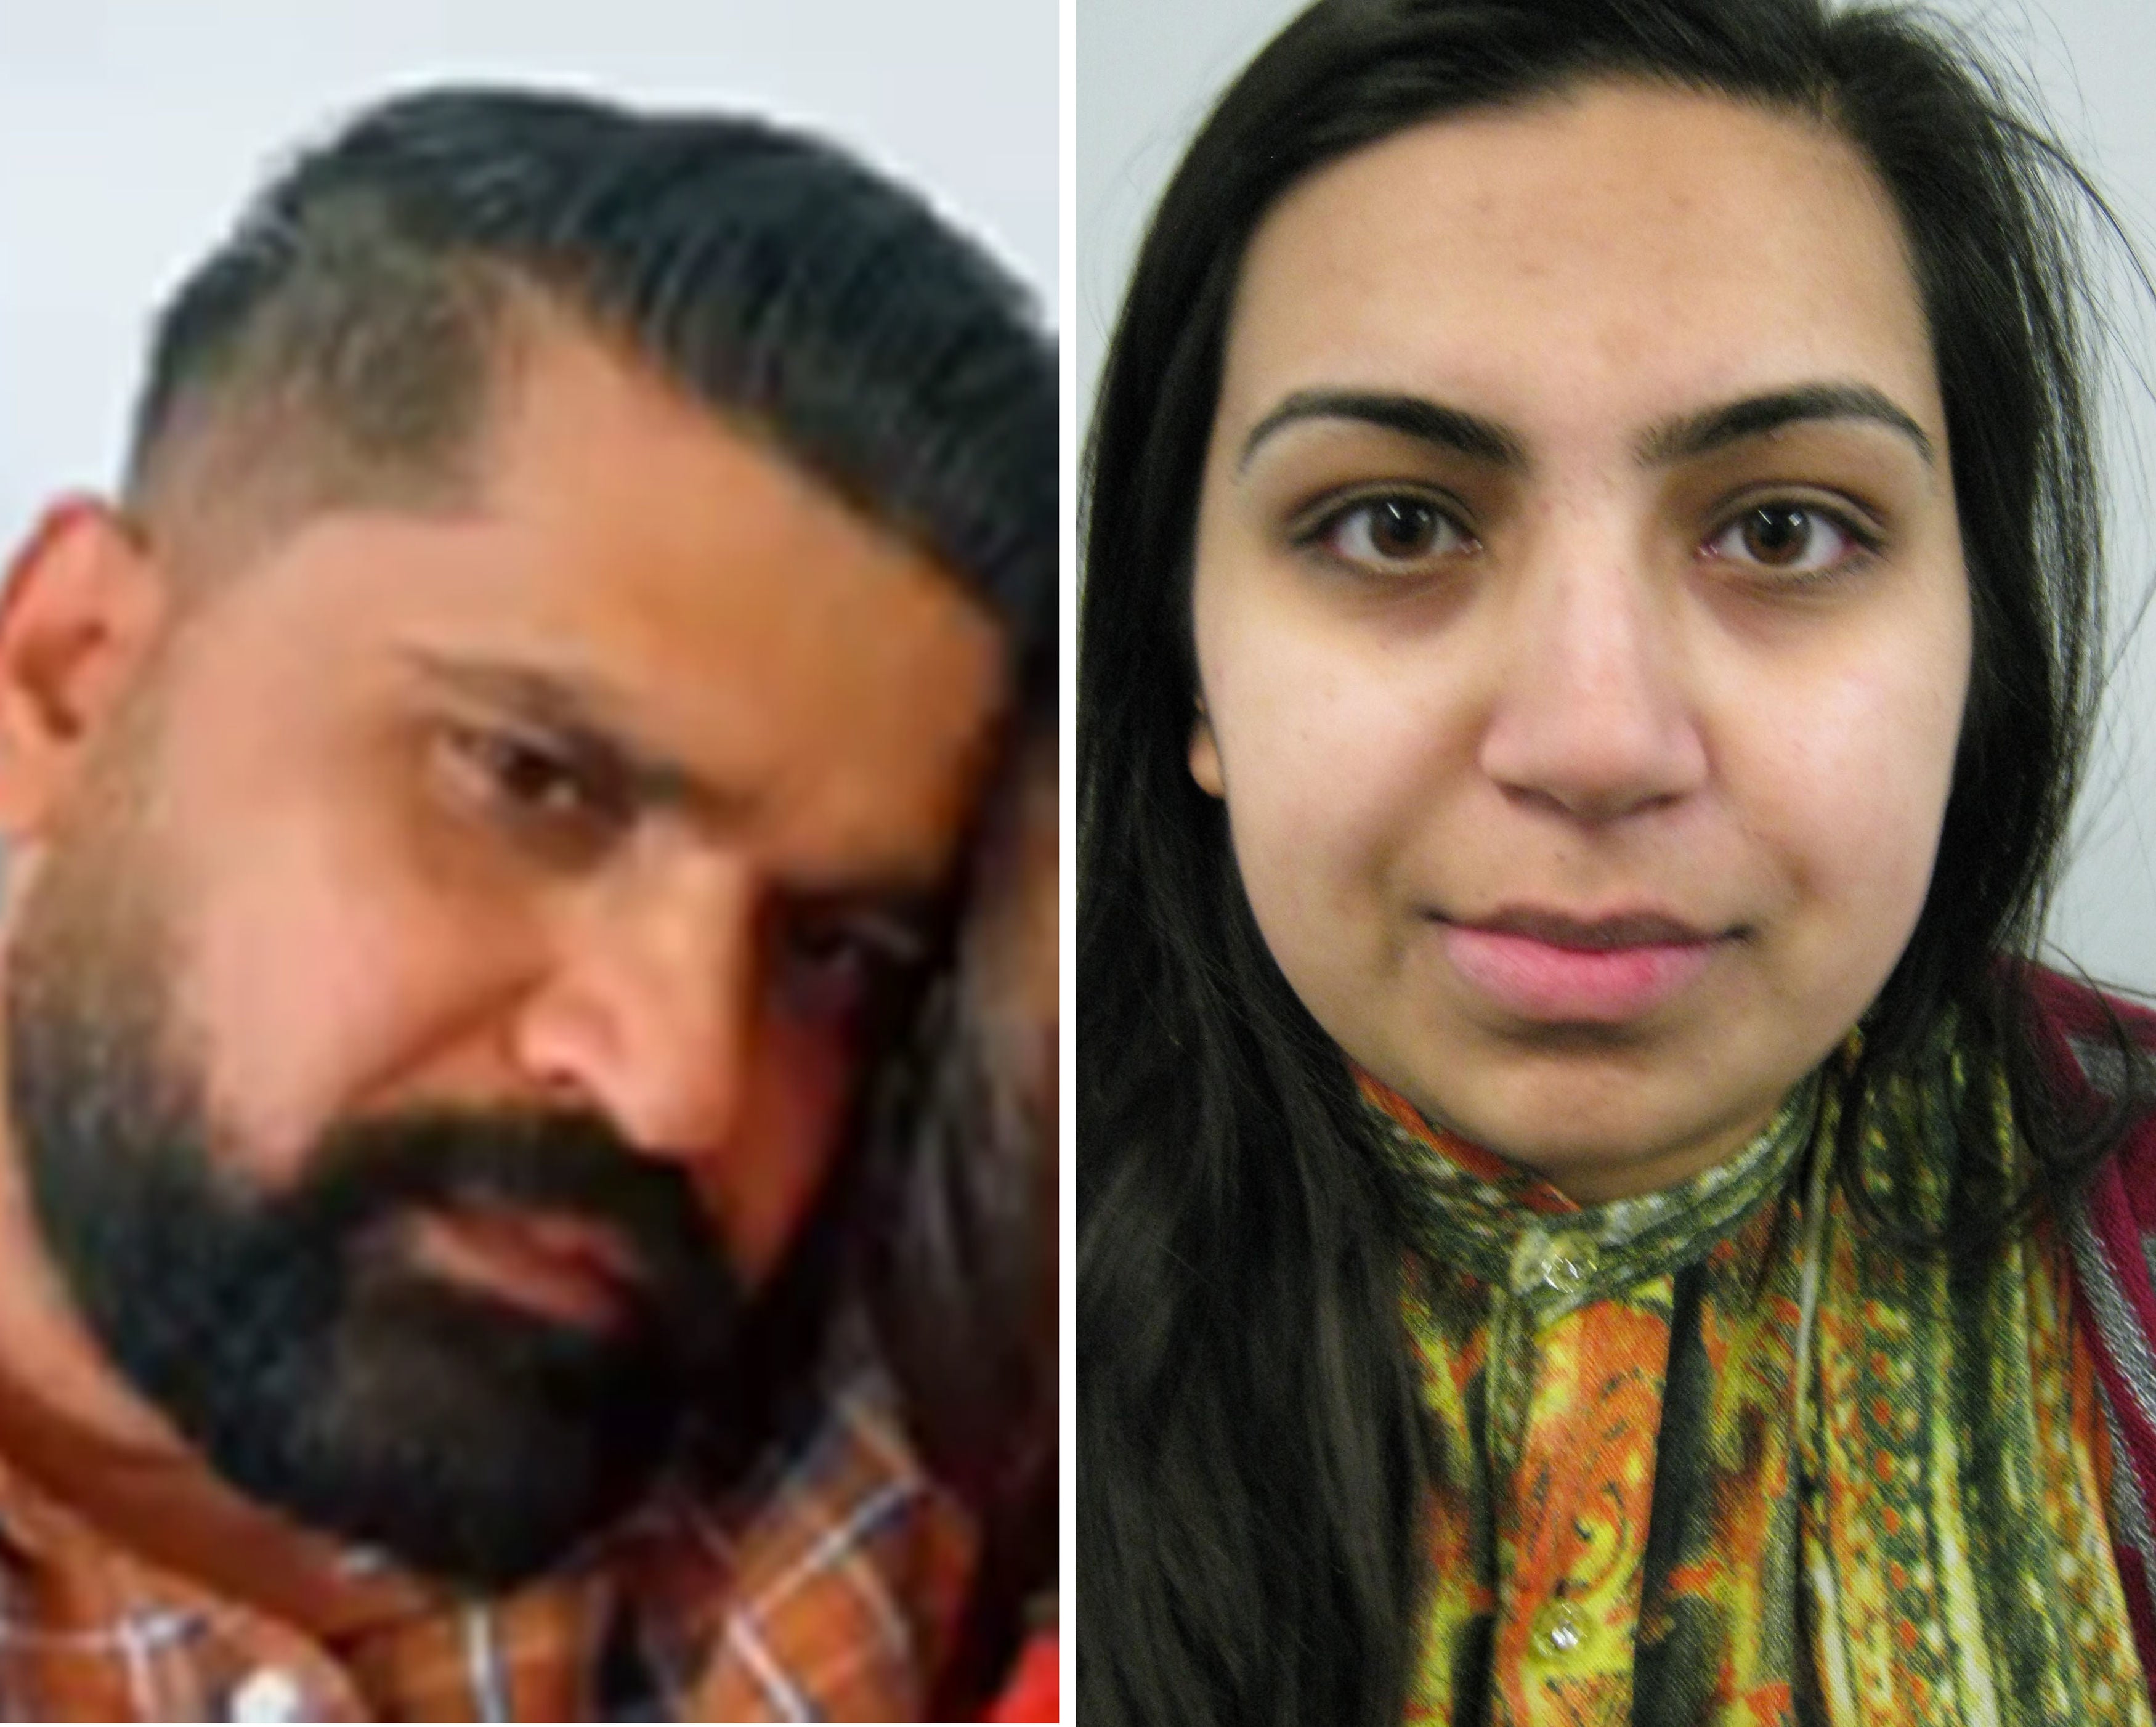 Her father Urfan Sharif (left) and his partner Beinash Batool (right) are being sought by Surrey Police